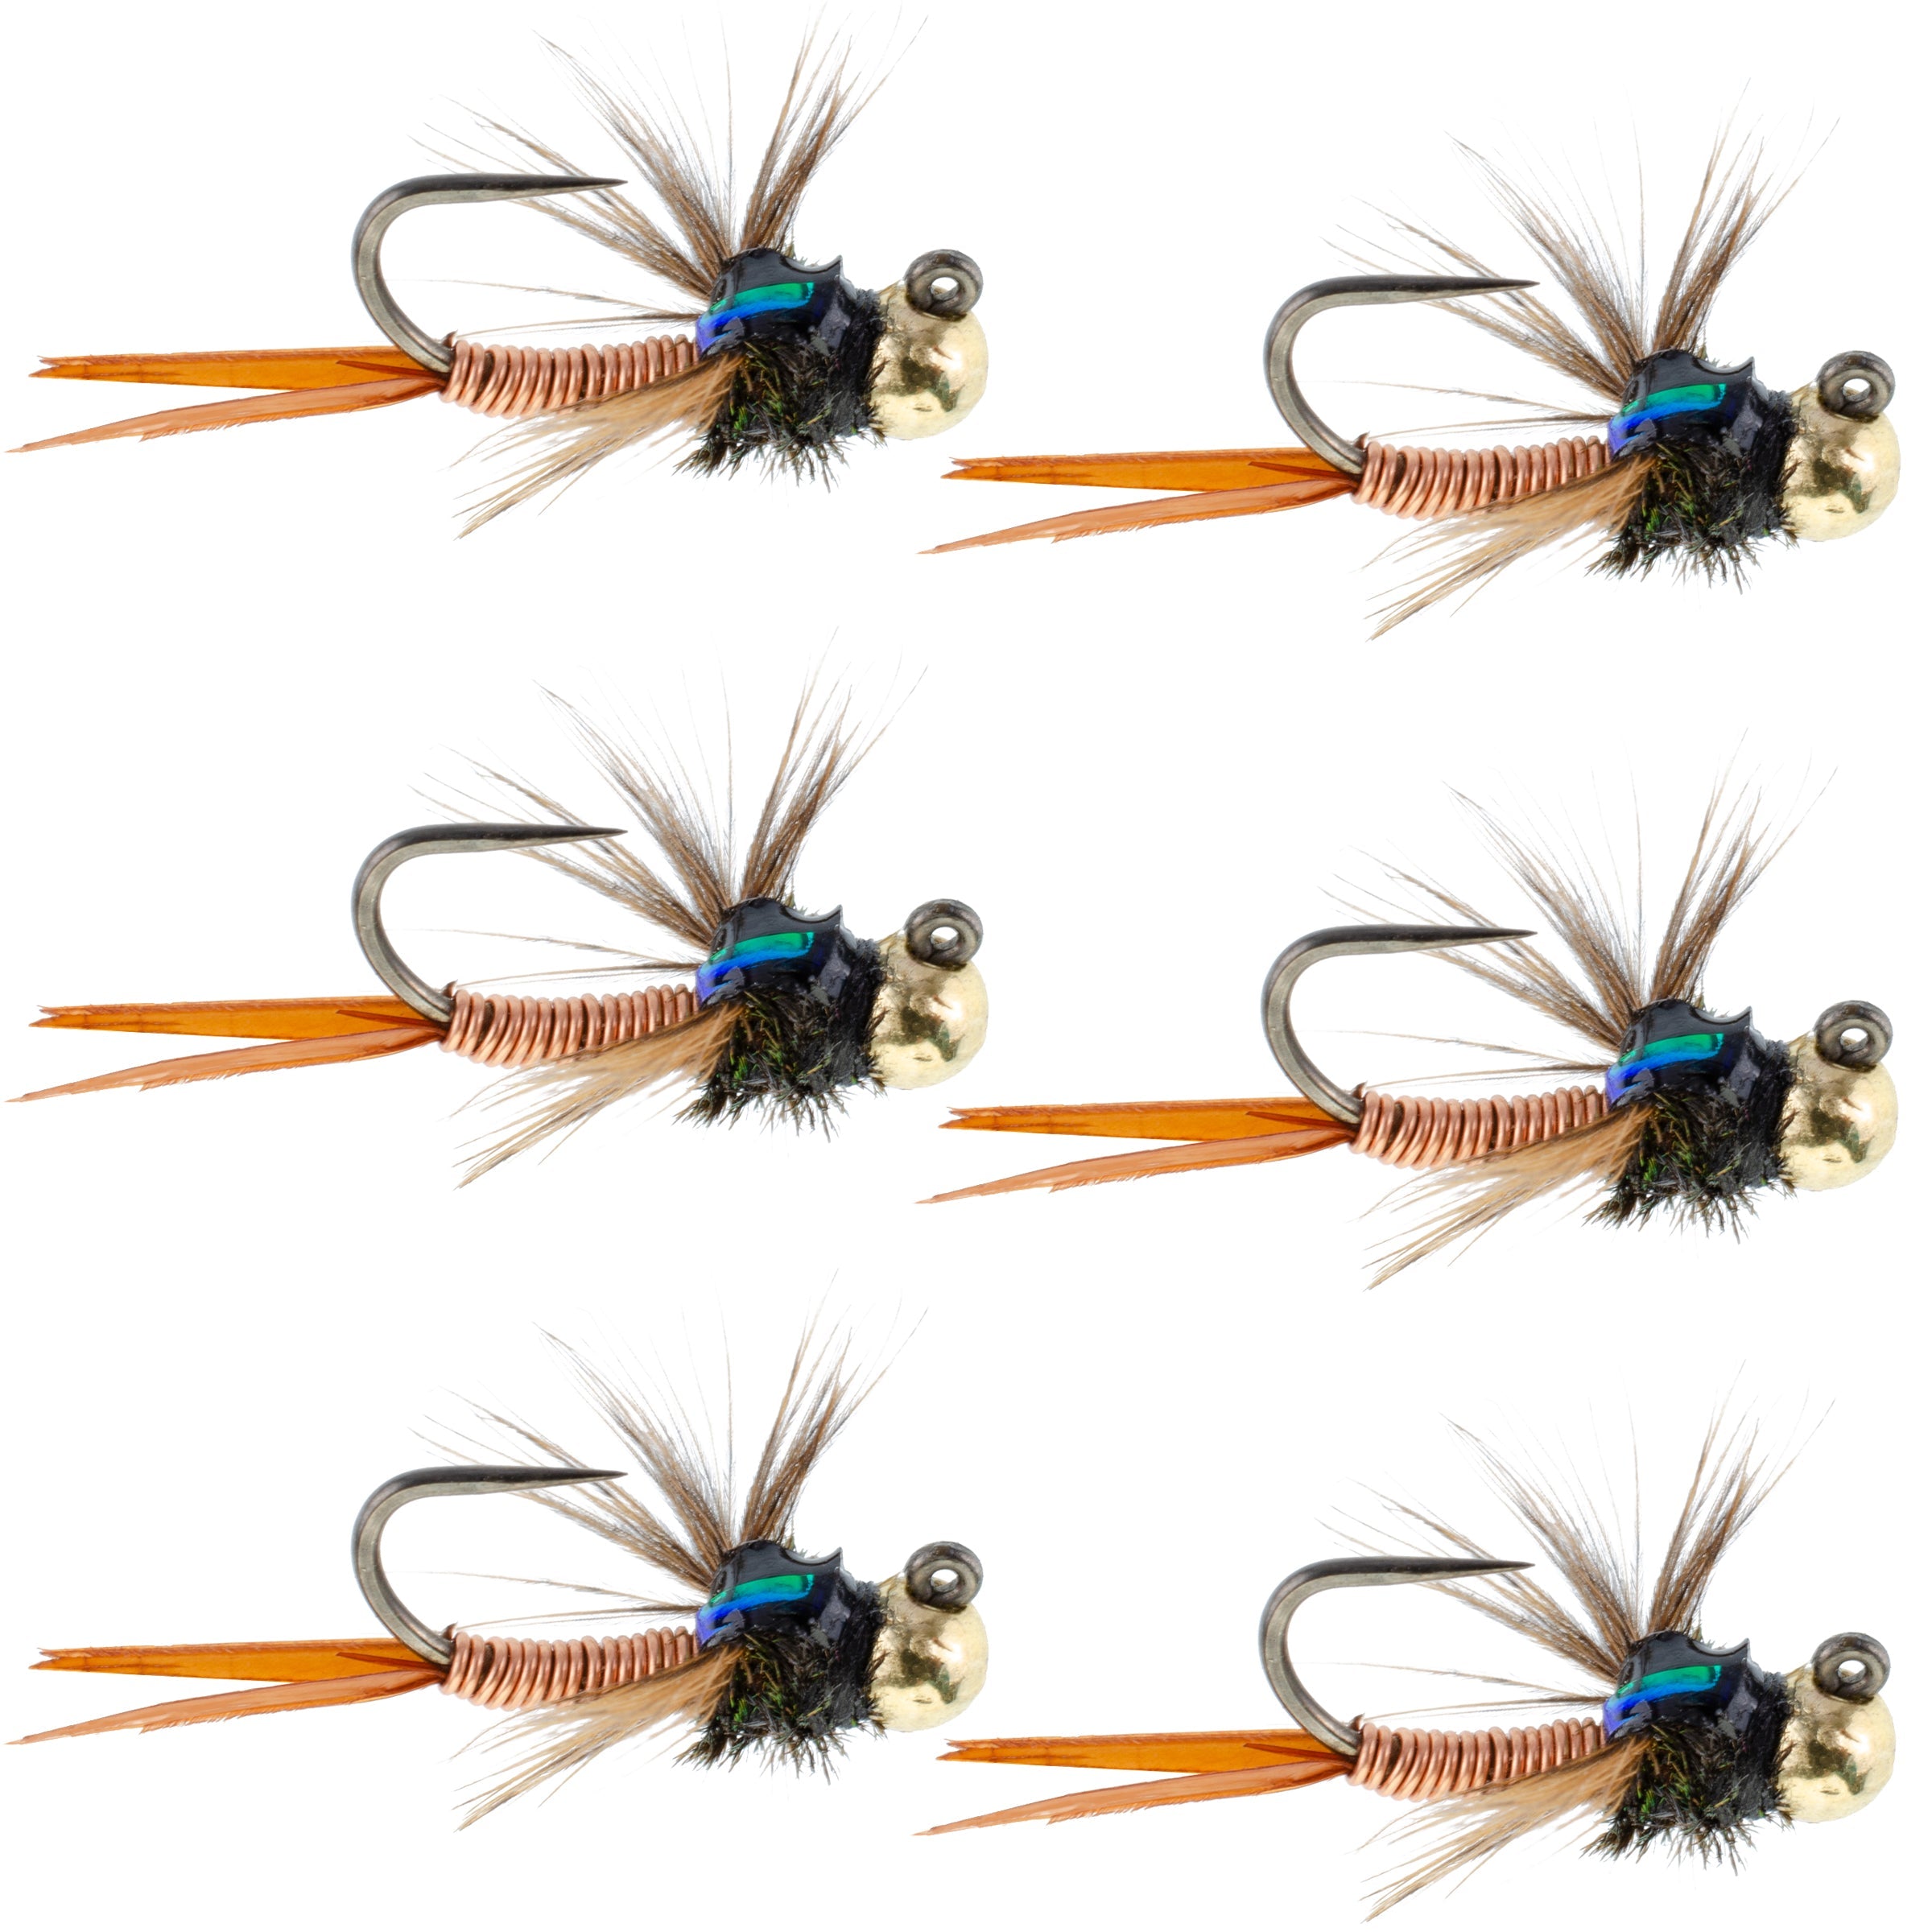 1 DOZEN BEAD HEAD RED WINE AND COPPER NYMPHS FOR FLY FISHING-BH-42